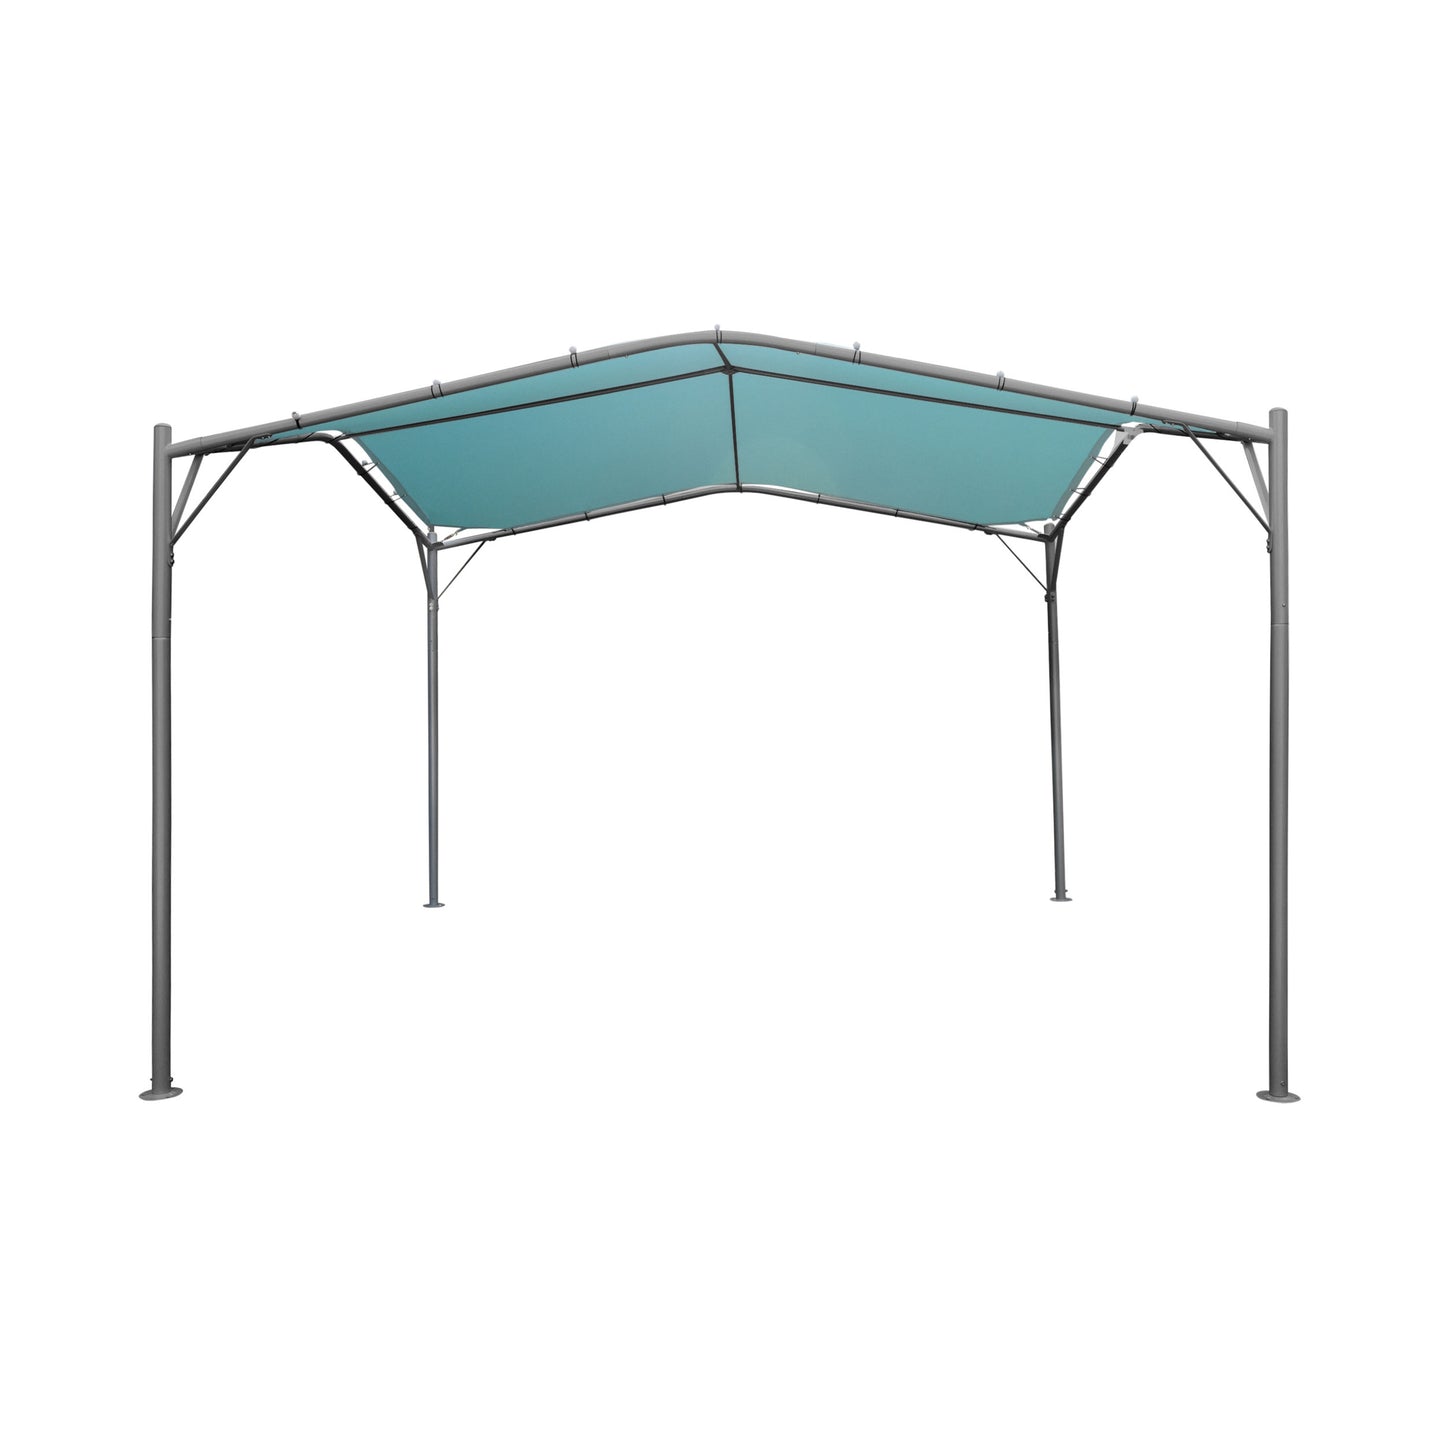 Tate Outdoor 12 x 12 Foot Canopy